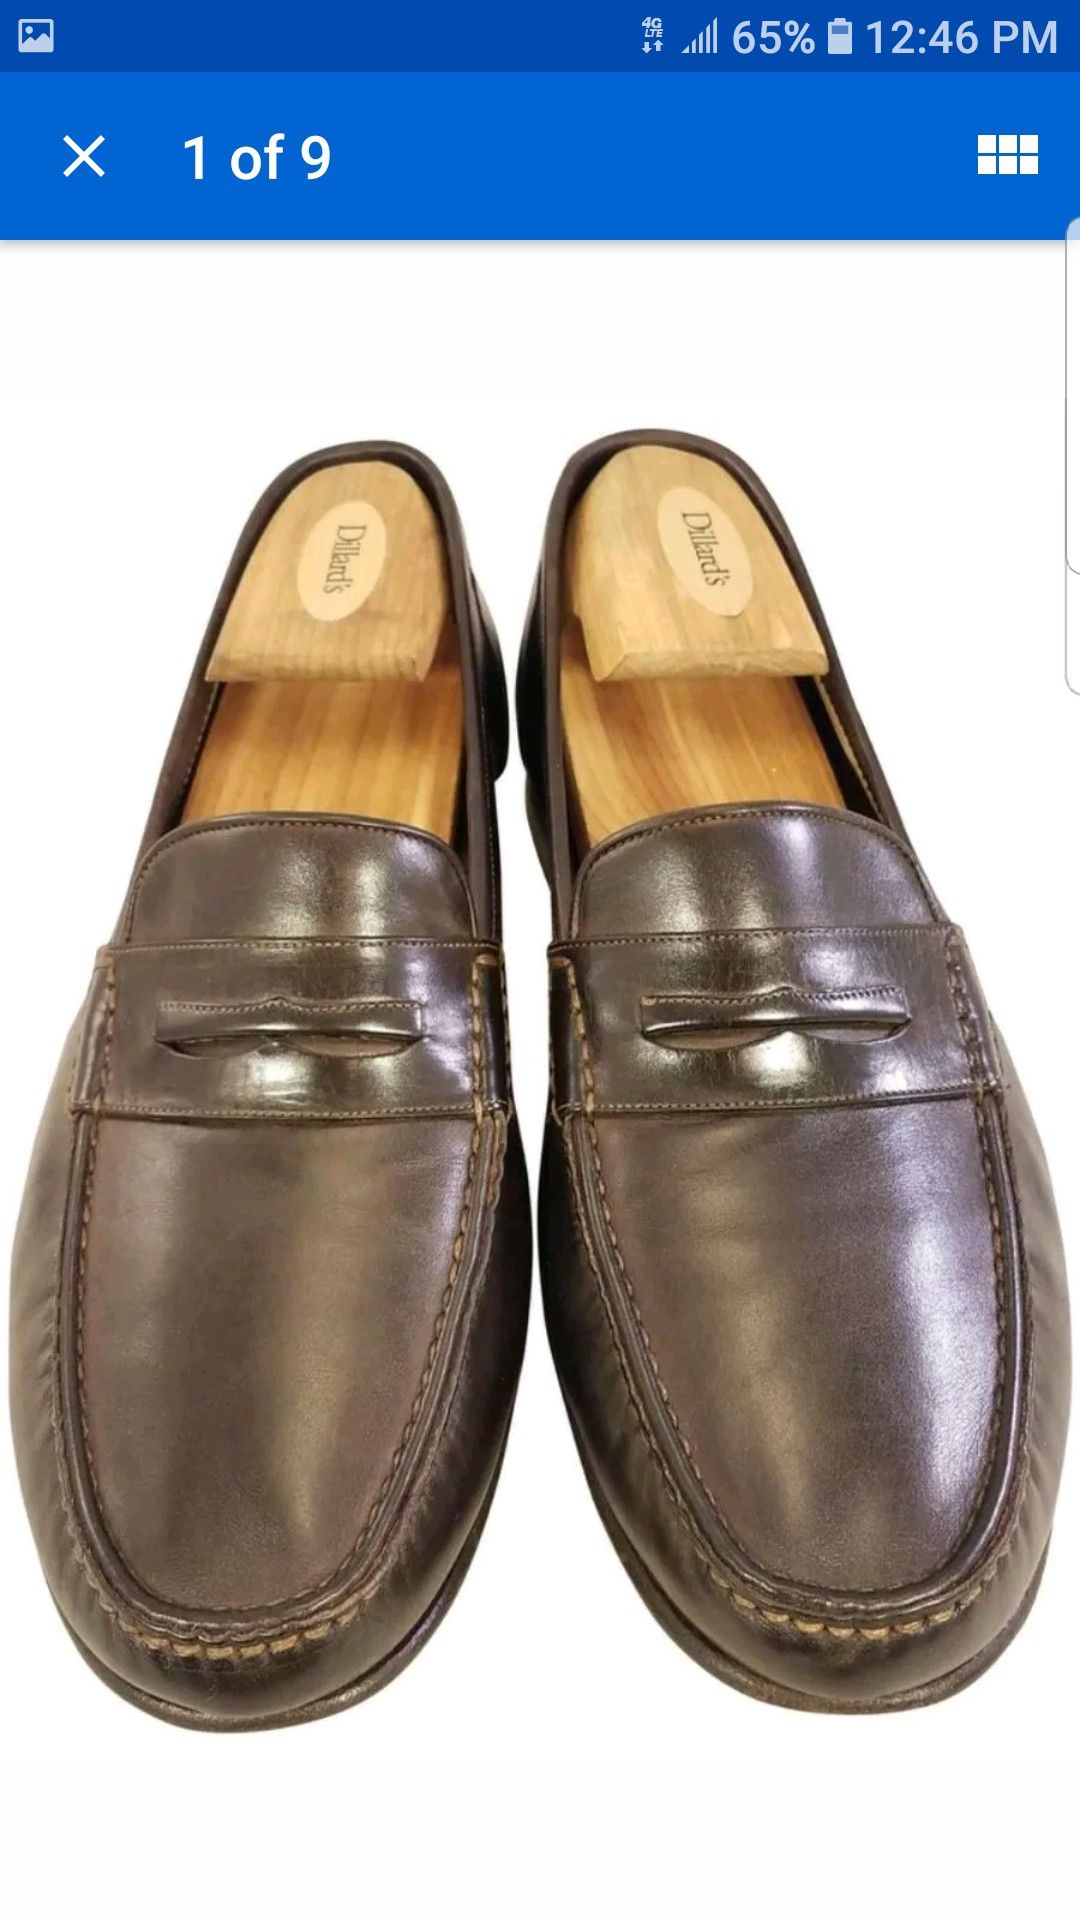 SANTONI MAN SHOES PENNY LOAFERS SLIP ONS BROWN LEATHER SIZE 9 EE